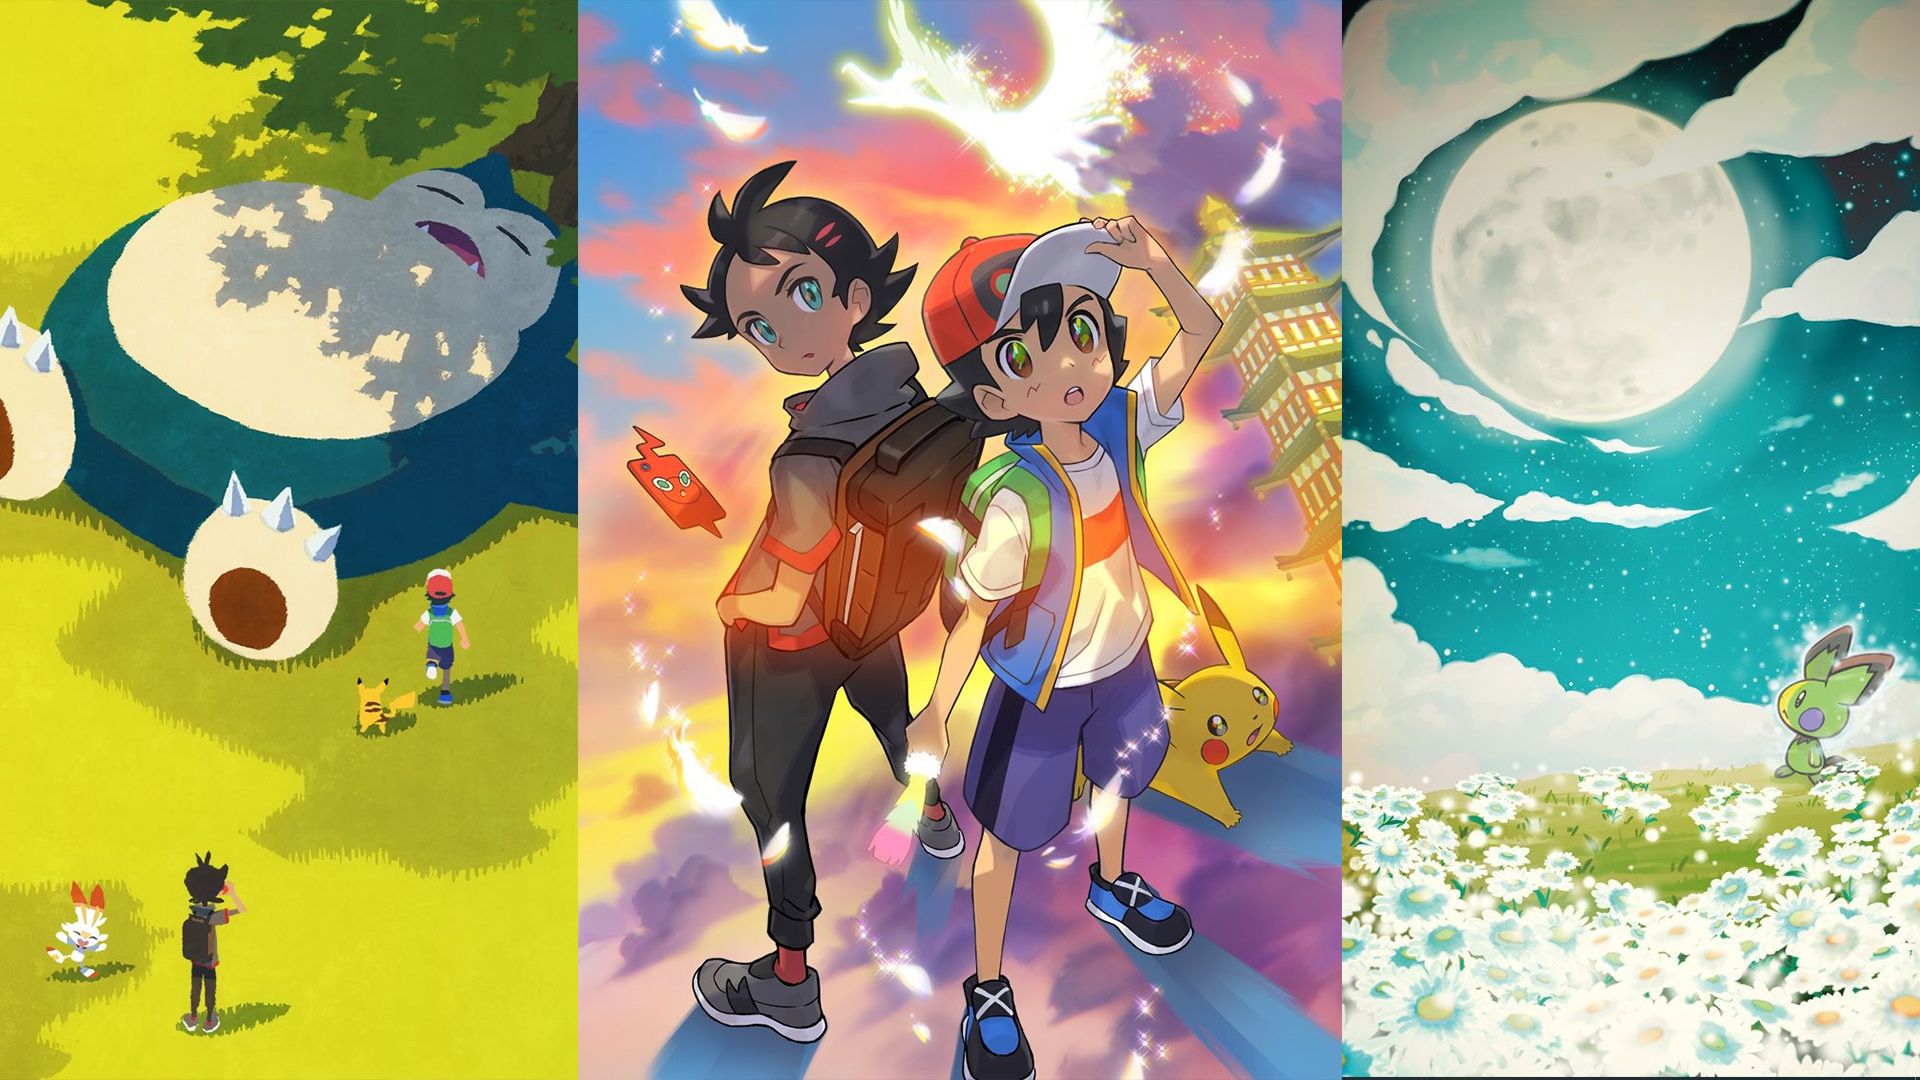 Latest Pokémon anime season heading to Netflix first in North America and Europe